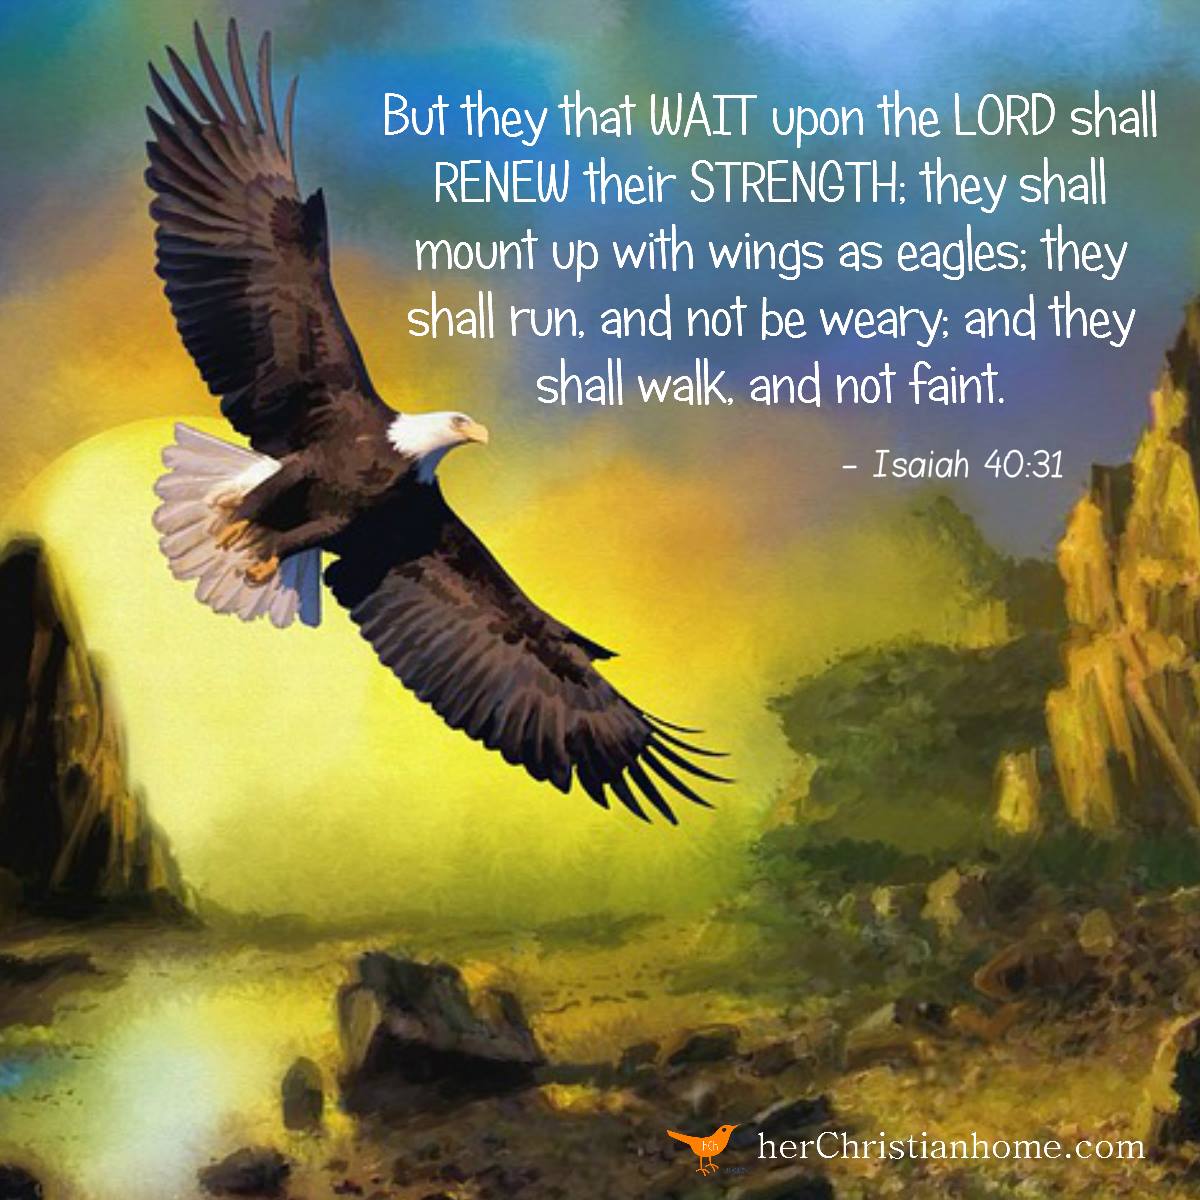 But they that wait upon the Lord Isaiah 40:31 KJV #bibleverses #isaiah #eagle